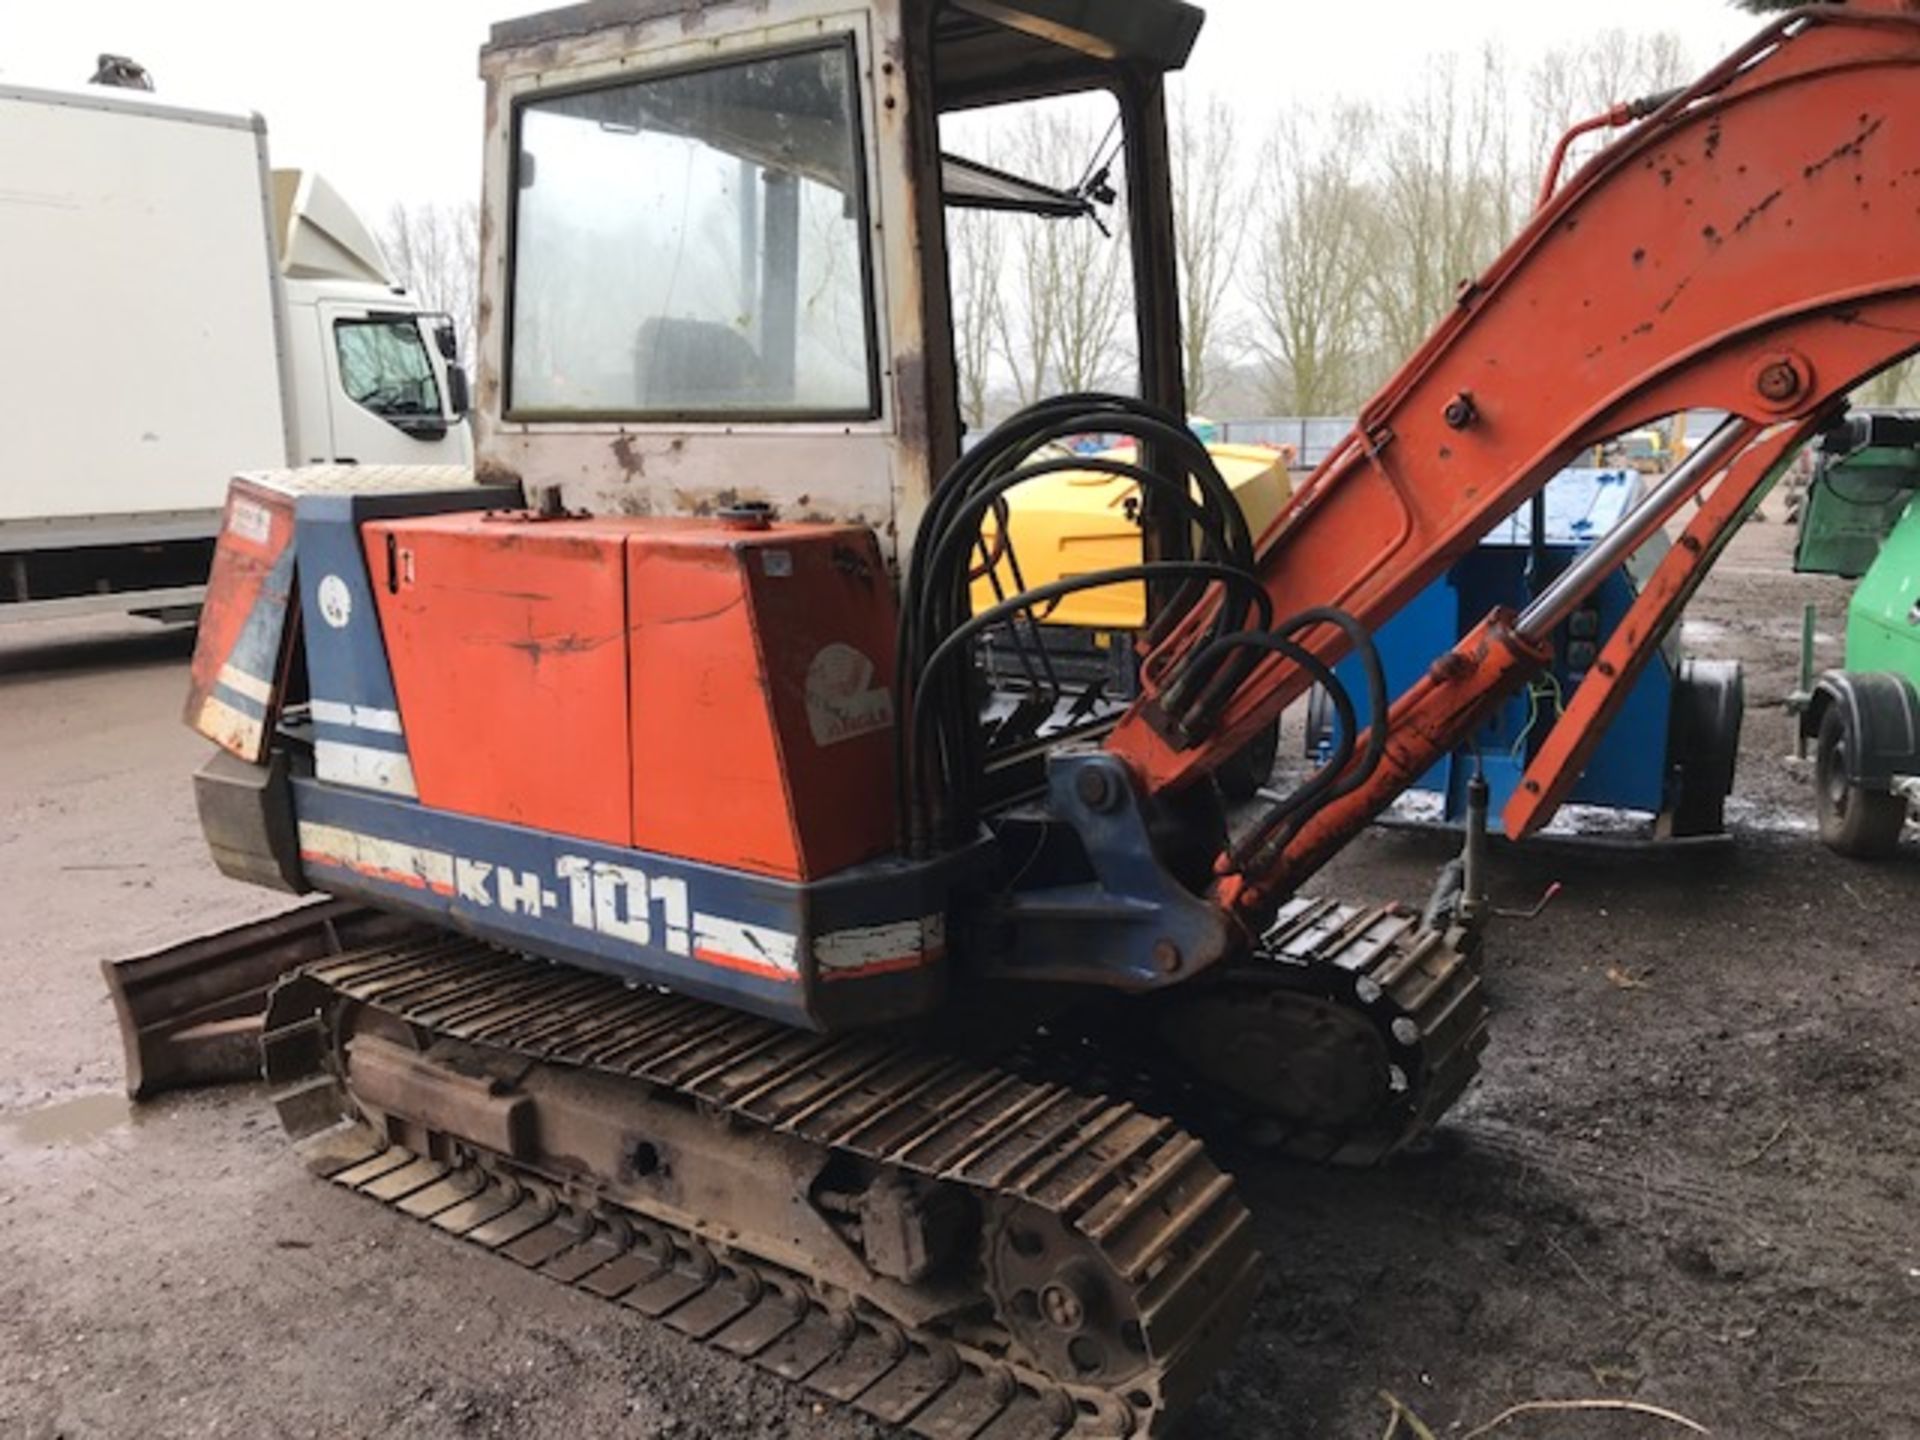 Kubota KH101 steel tracked excavator c/w grading bucket KH101-10619 when tested was seen to drive